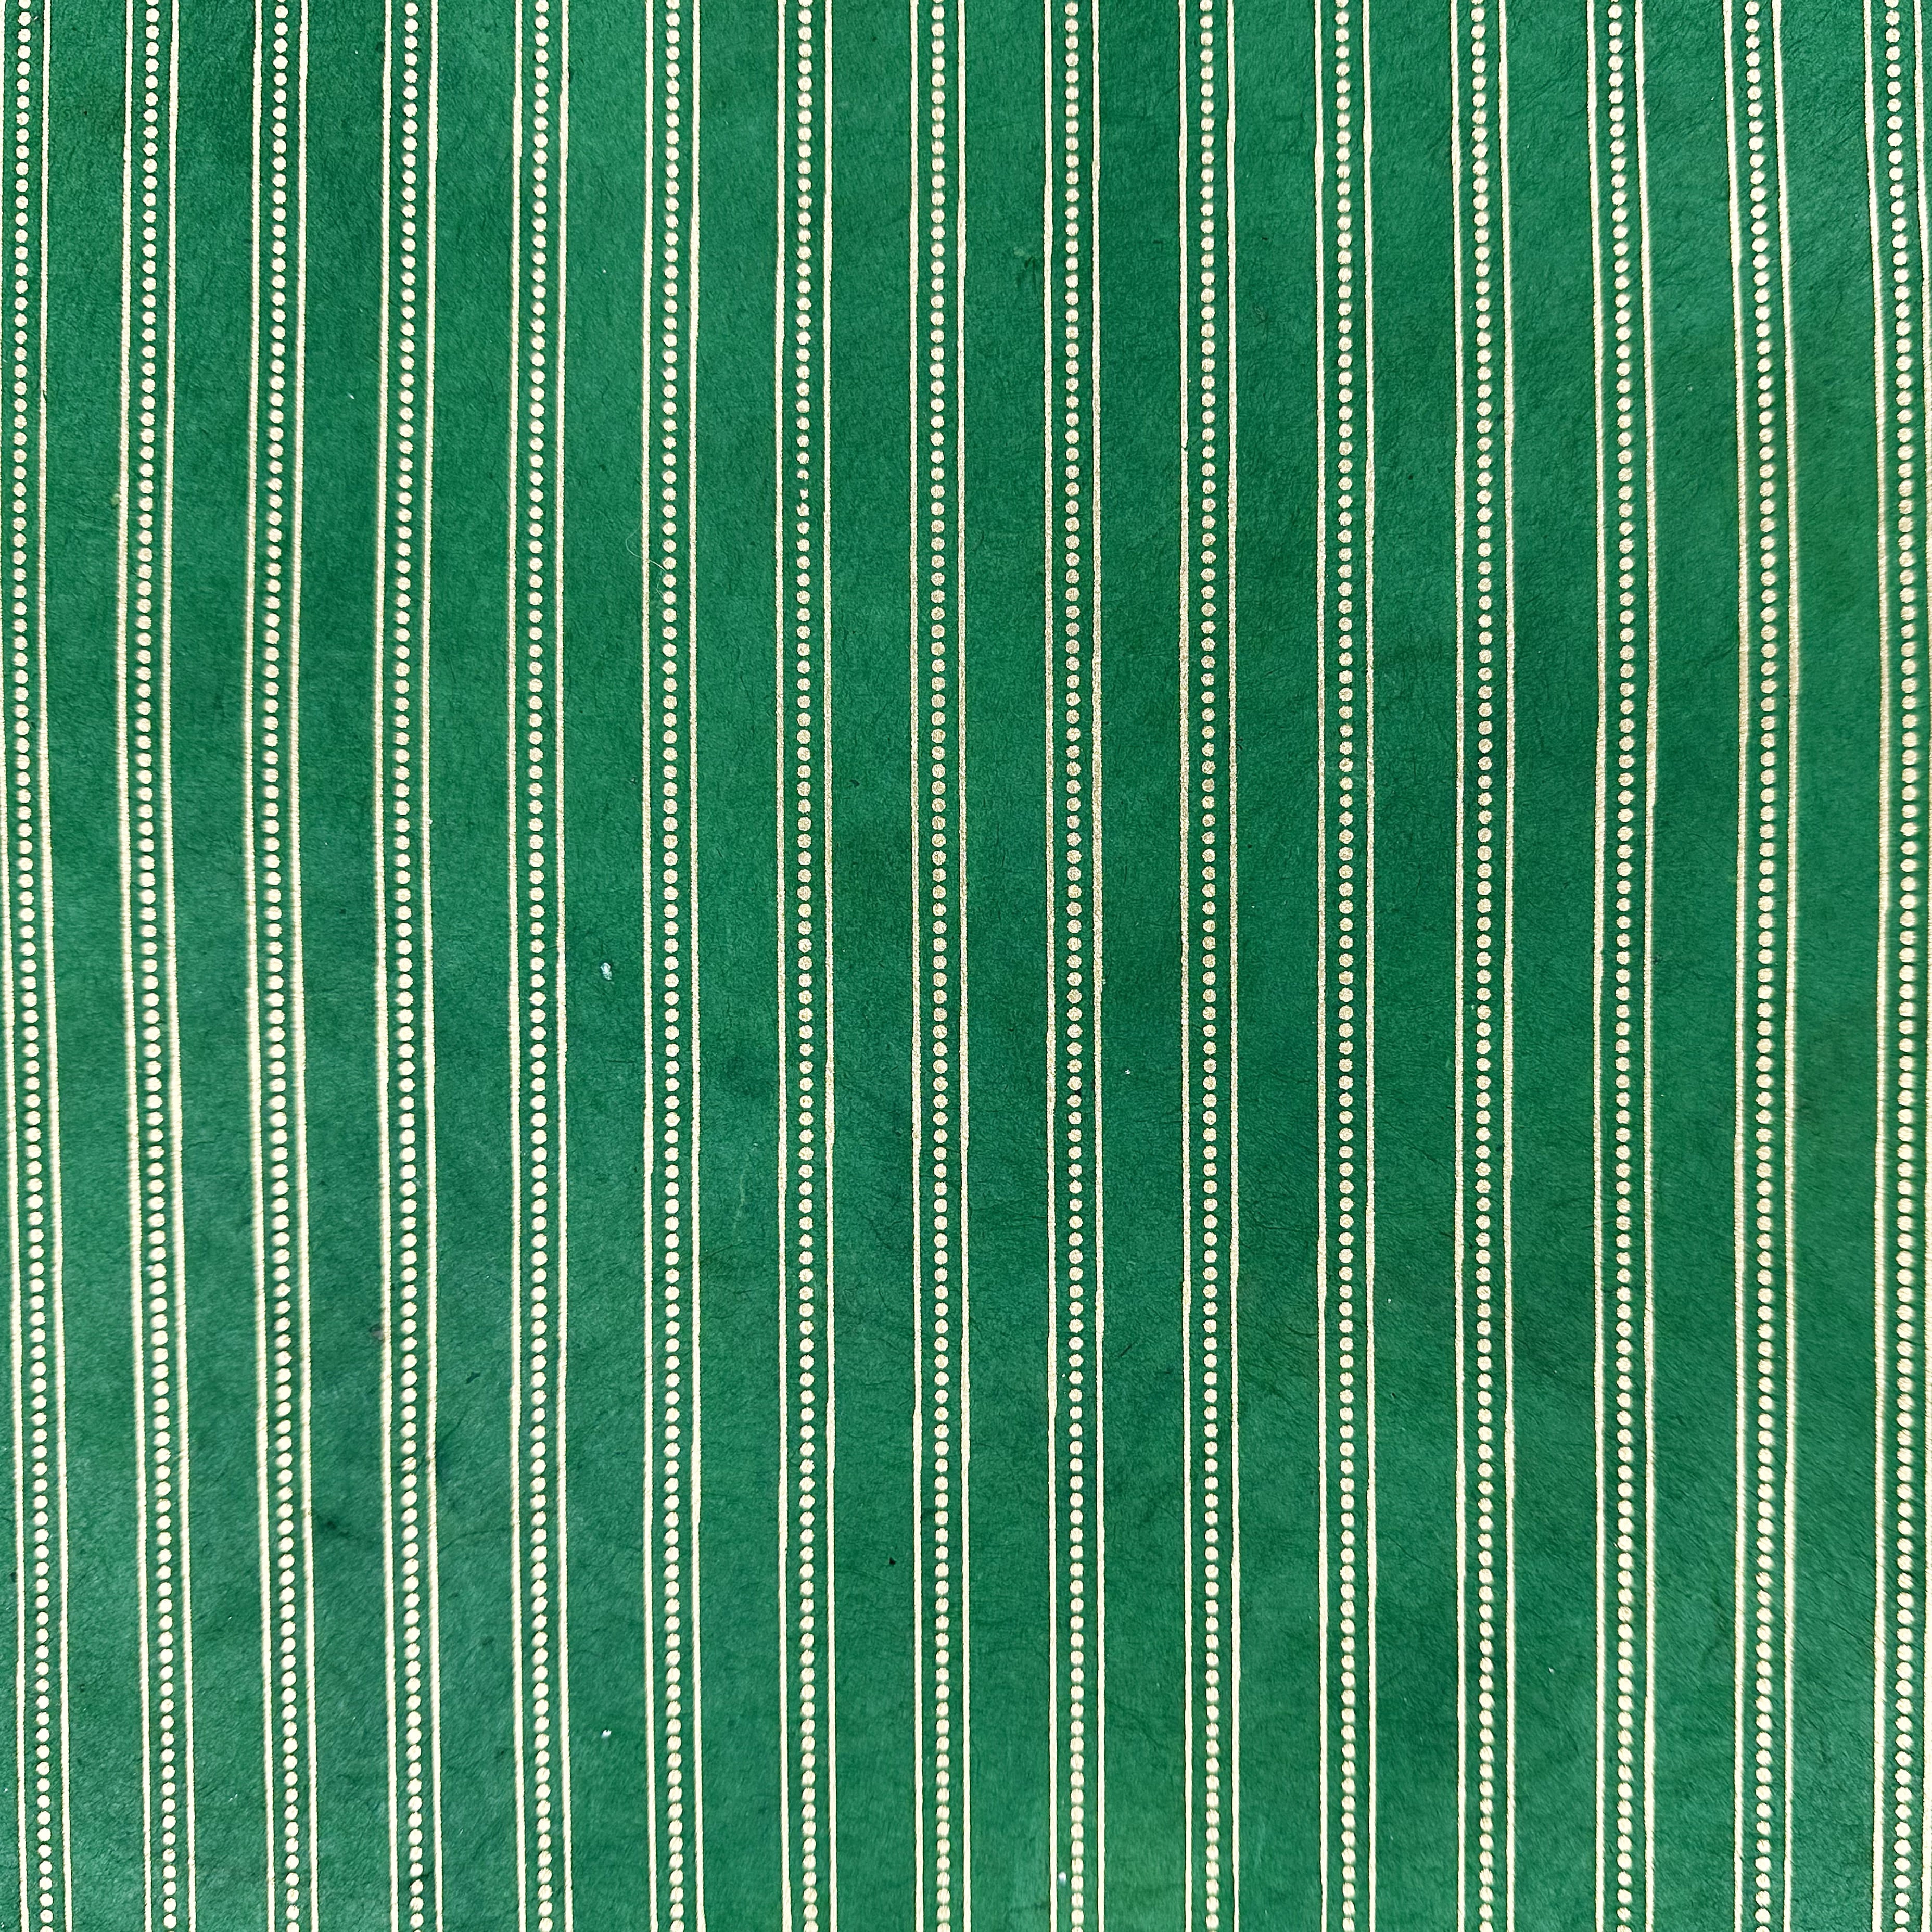 Nepalese Paper | Lokta | Stripes | 2 COLOUR OPTIONS AVAILABLE